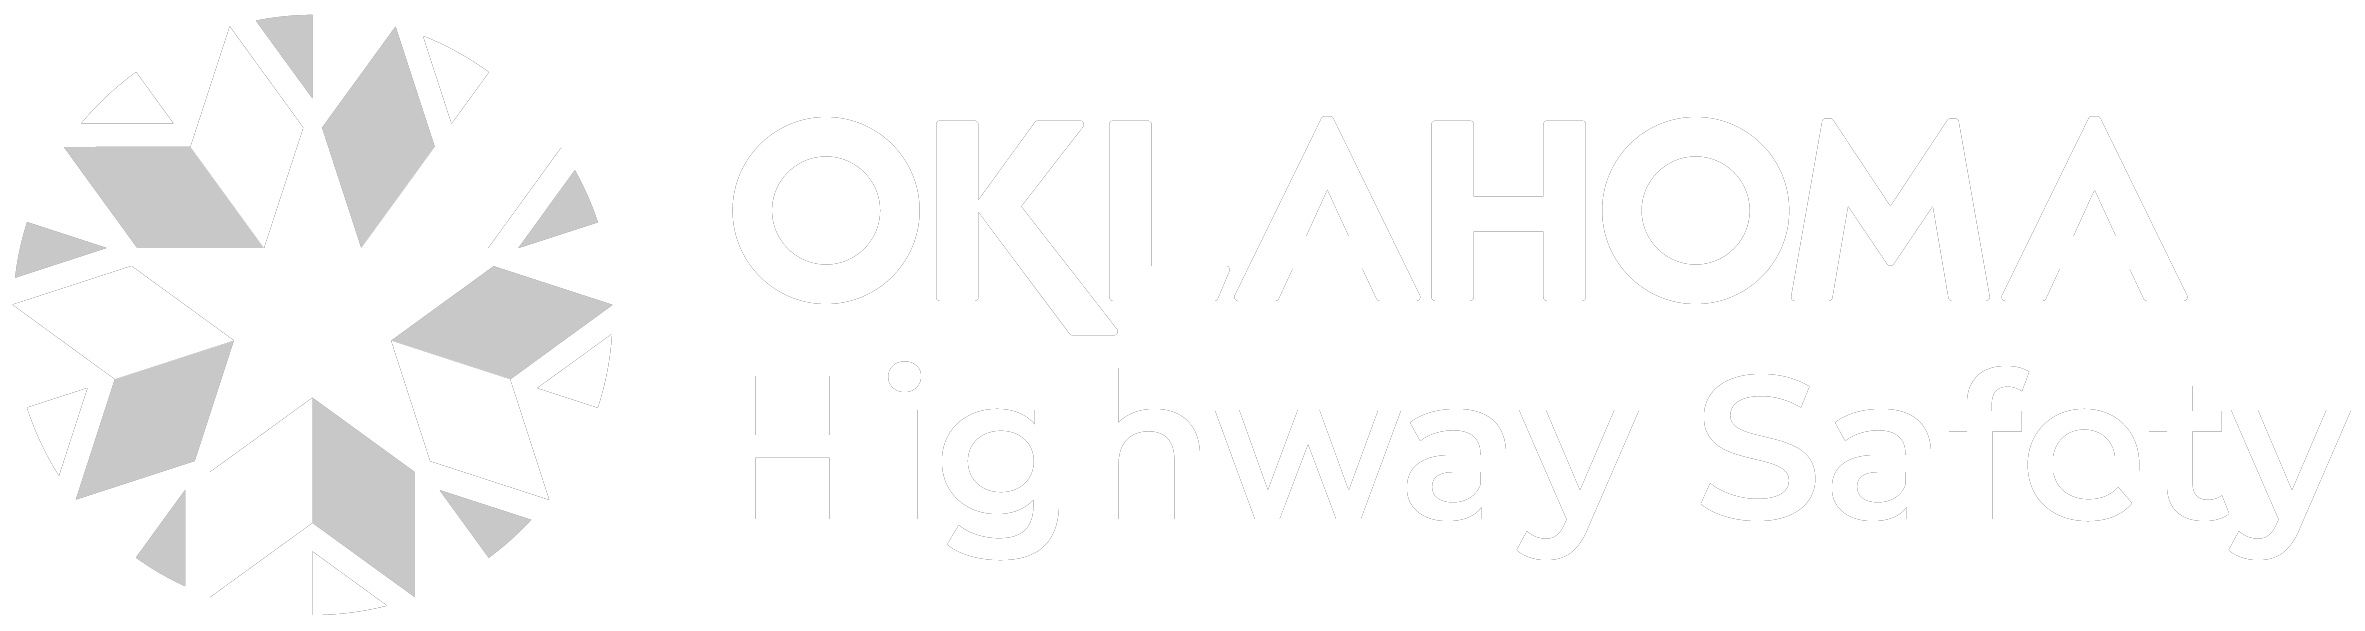 Oklahoma Highway Safety Office Home